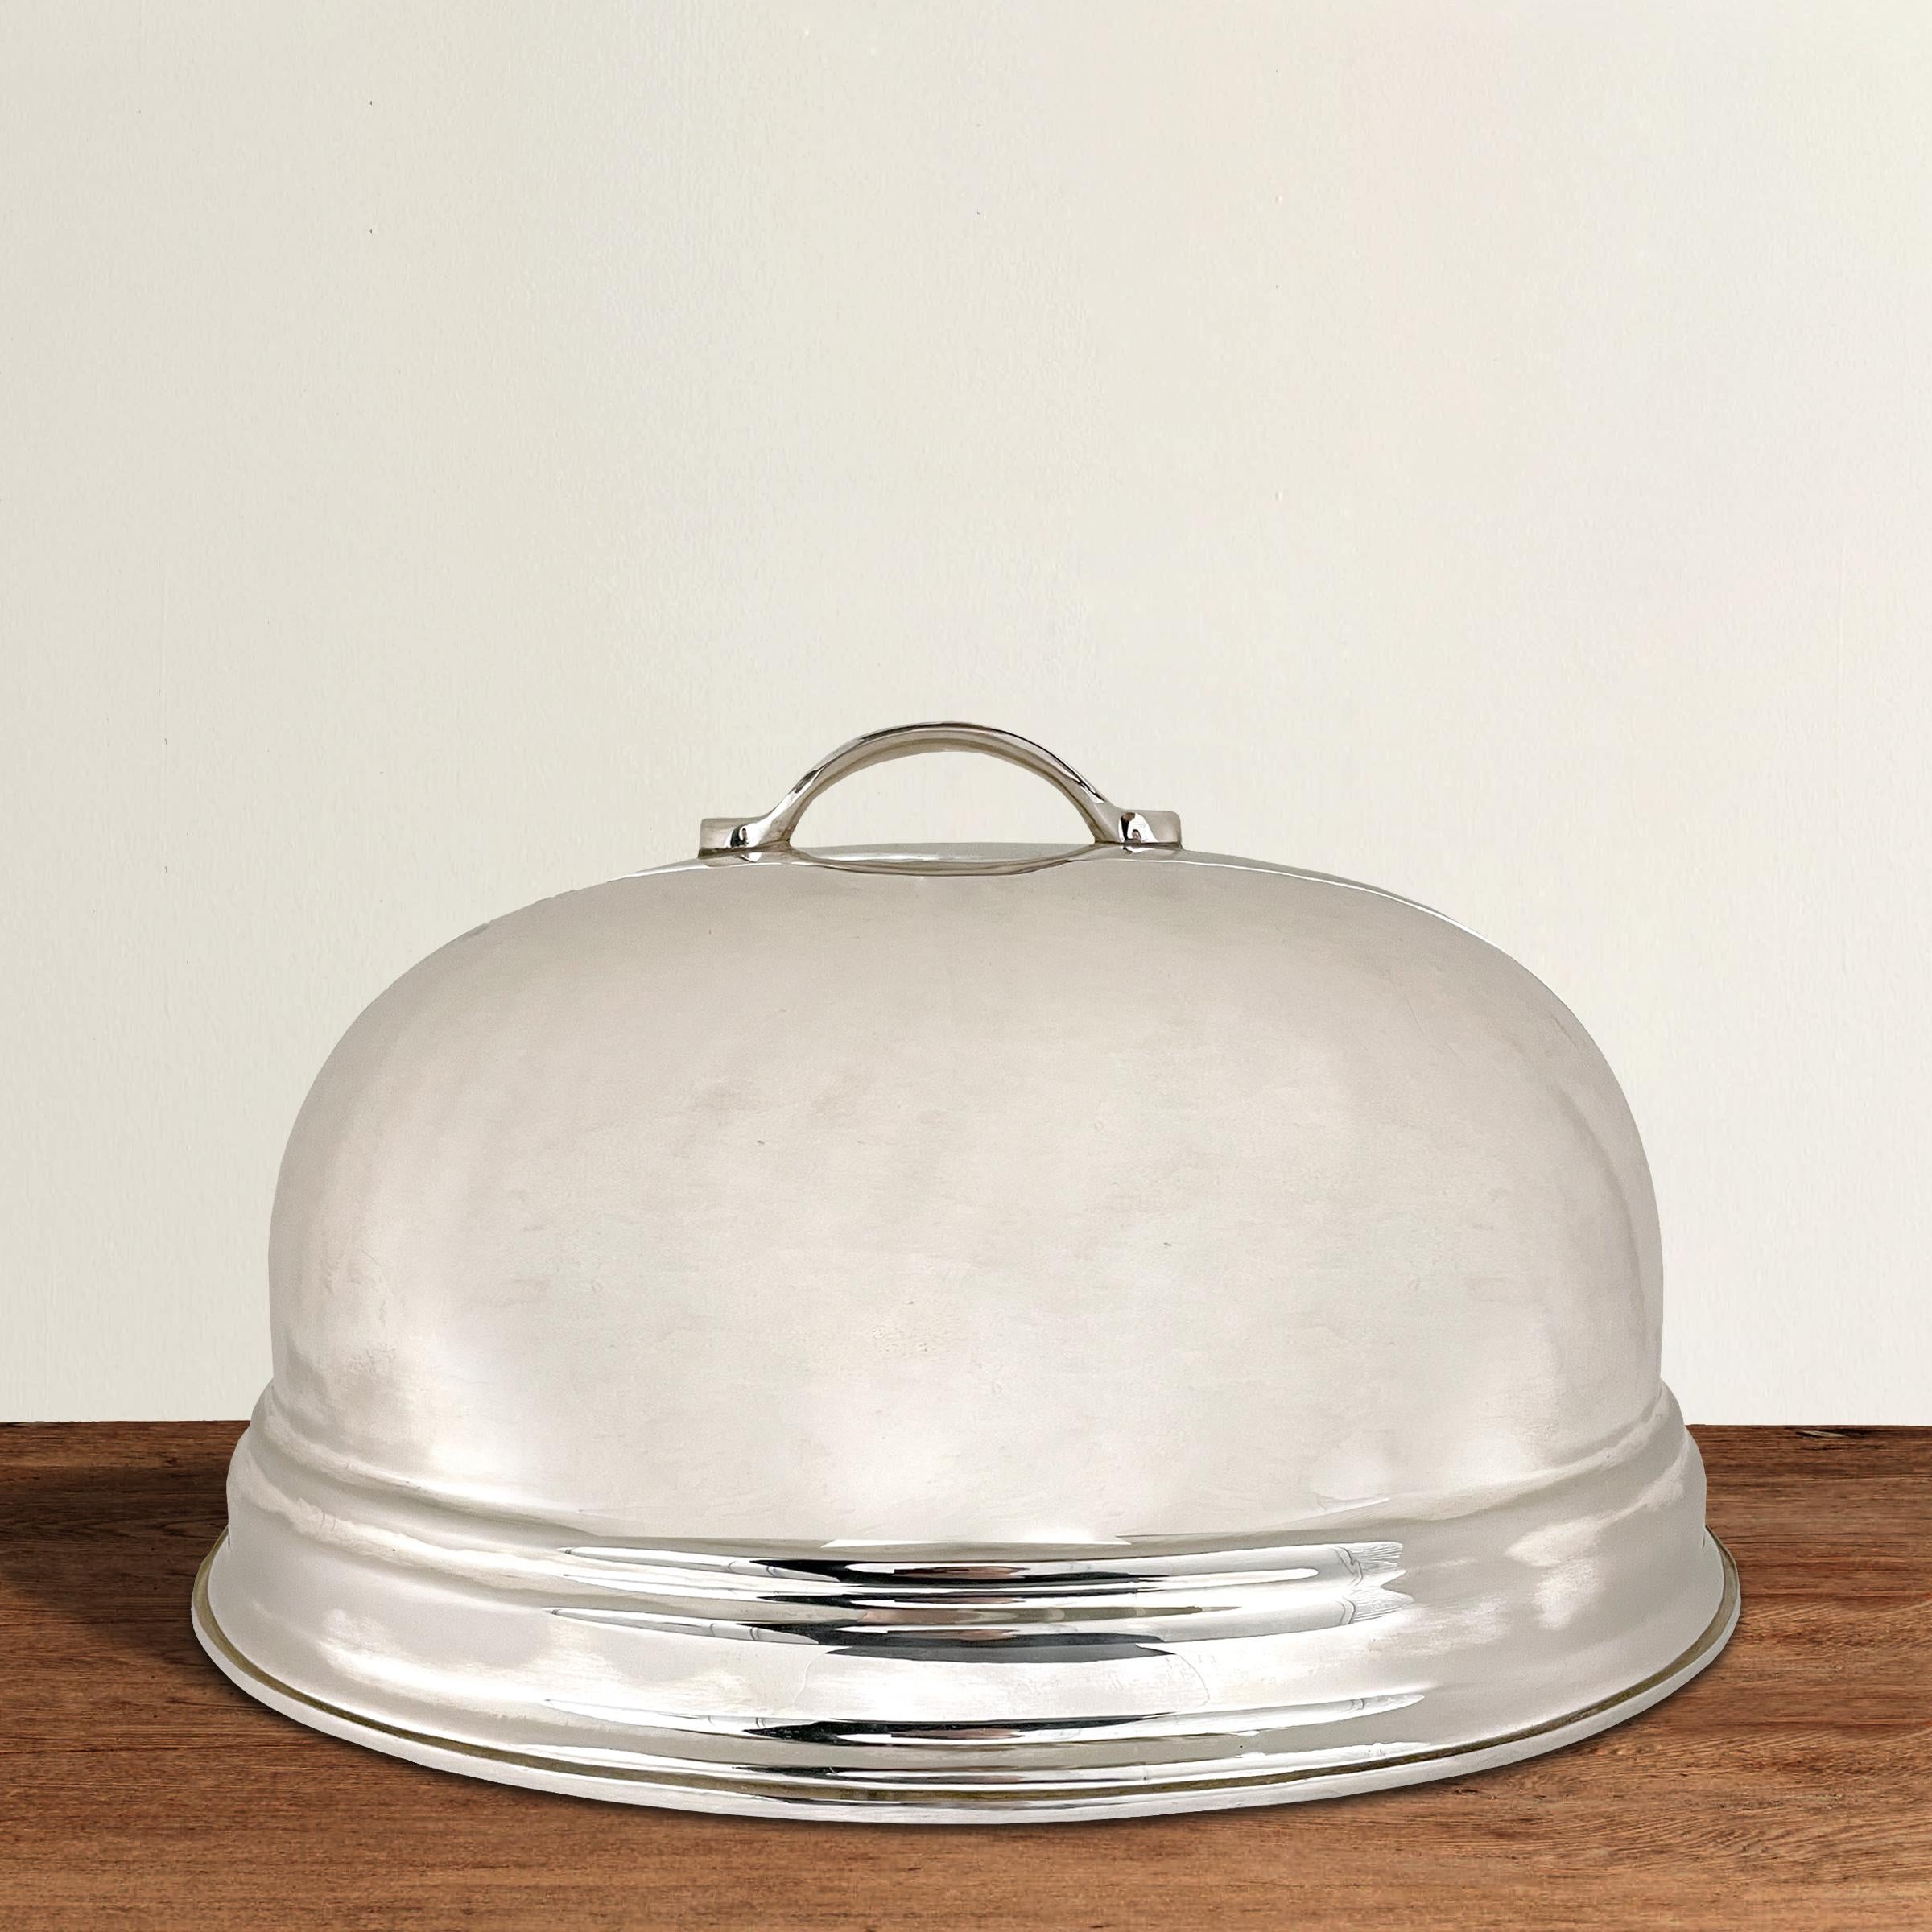 An incredible large silver-plate food dome with a beautiful, simple decorative edge detail. Large enough to fit your Thanksgiving turkey, holiday ham, or a few roast chickens on any other day of the year.